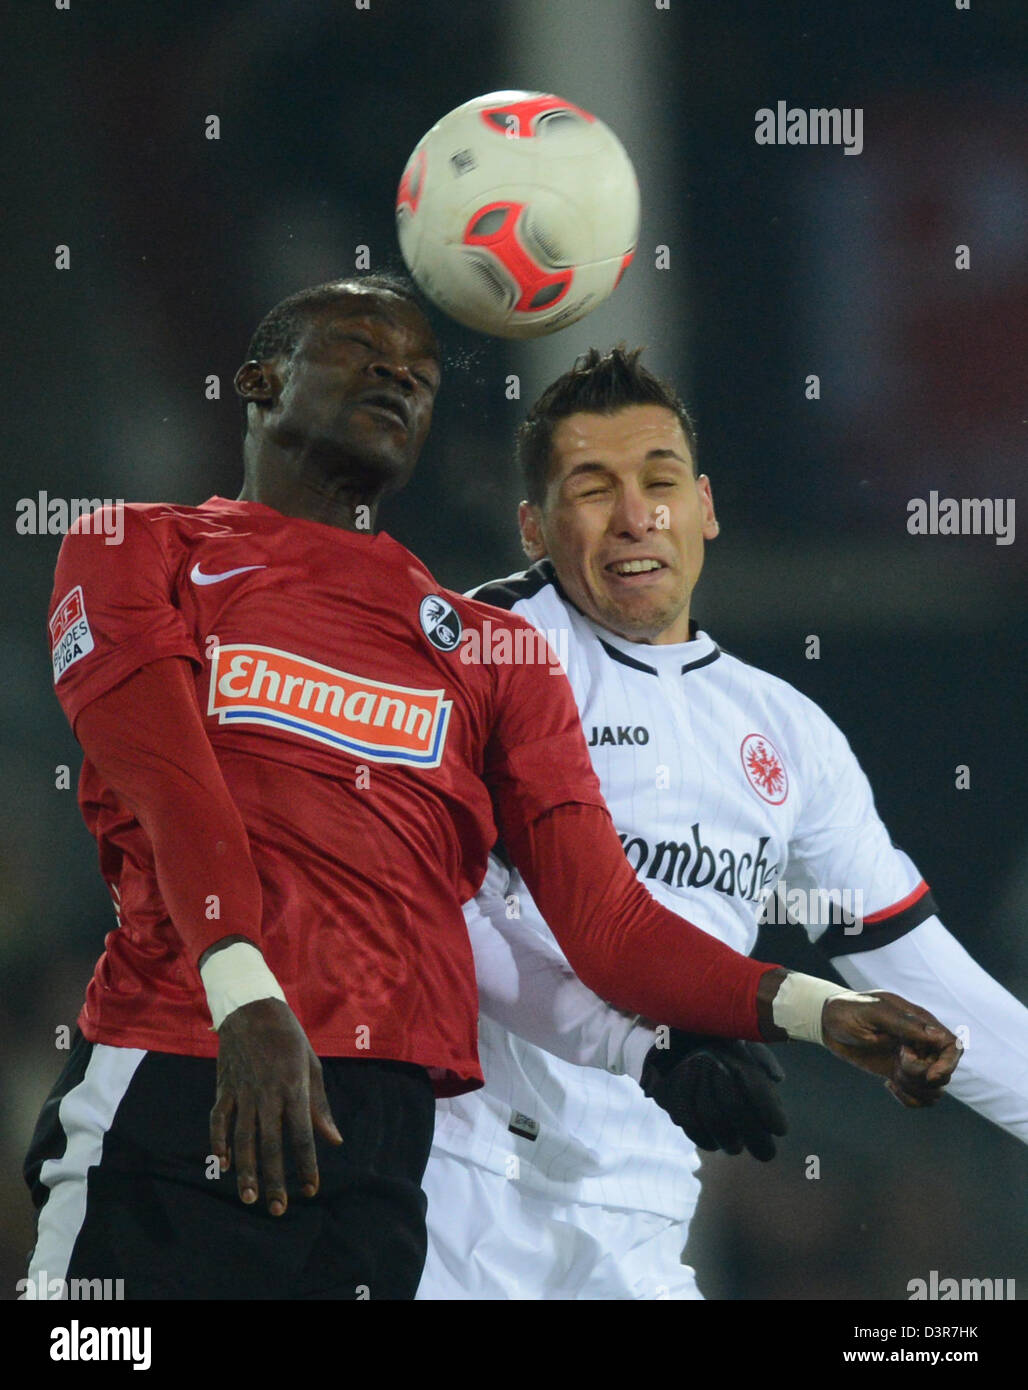 Freiburg, Germany. 22nd February 2013. Freiburg's Fallou Diagne (L) vies for the ball with Frankfurt's  Karim Matmour during the Bundesliga soccer match between SC Freiburg and Eintracht Frankfurt at Mage Solar Stadium in Freiburg, Germany, 22 February 2013. Photo: Patrick Seeger/dpa/Alamy Live News Stock Photo